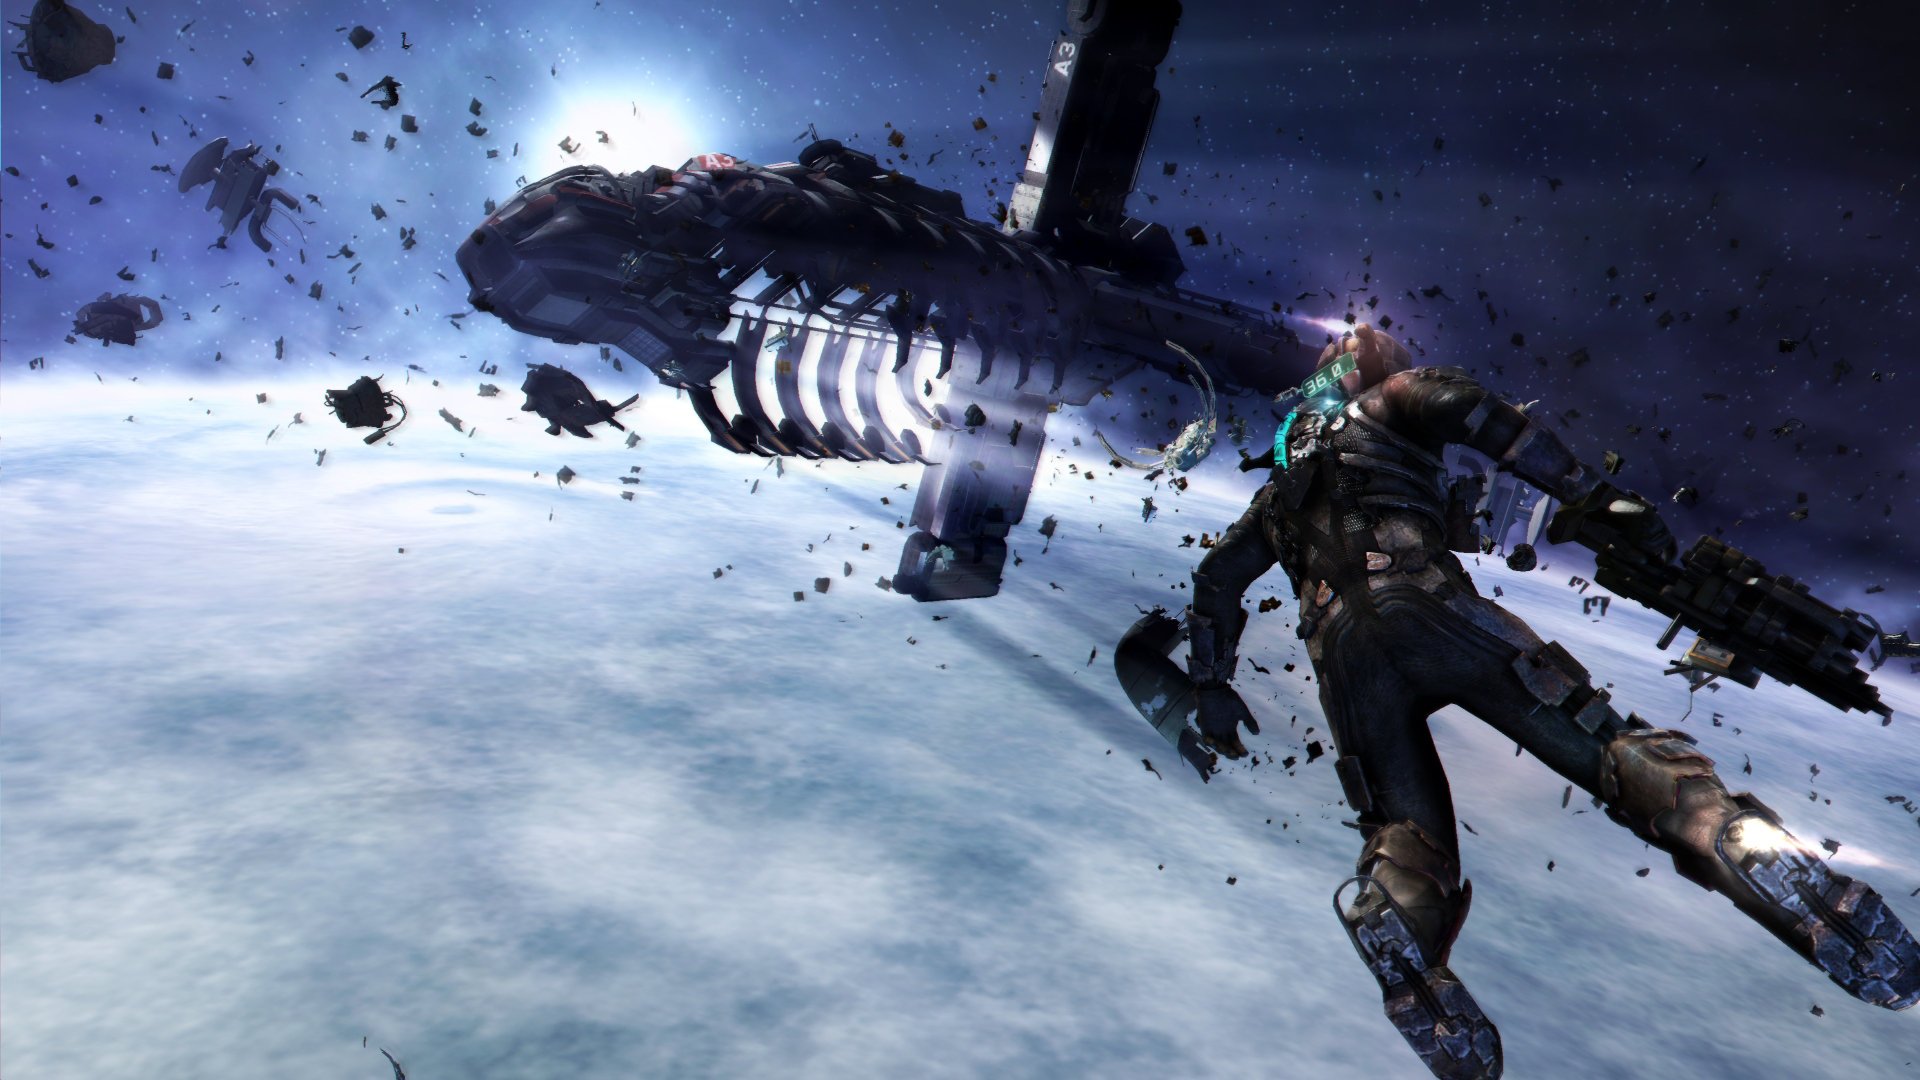 Dead Space 4 could have been something beautiful